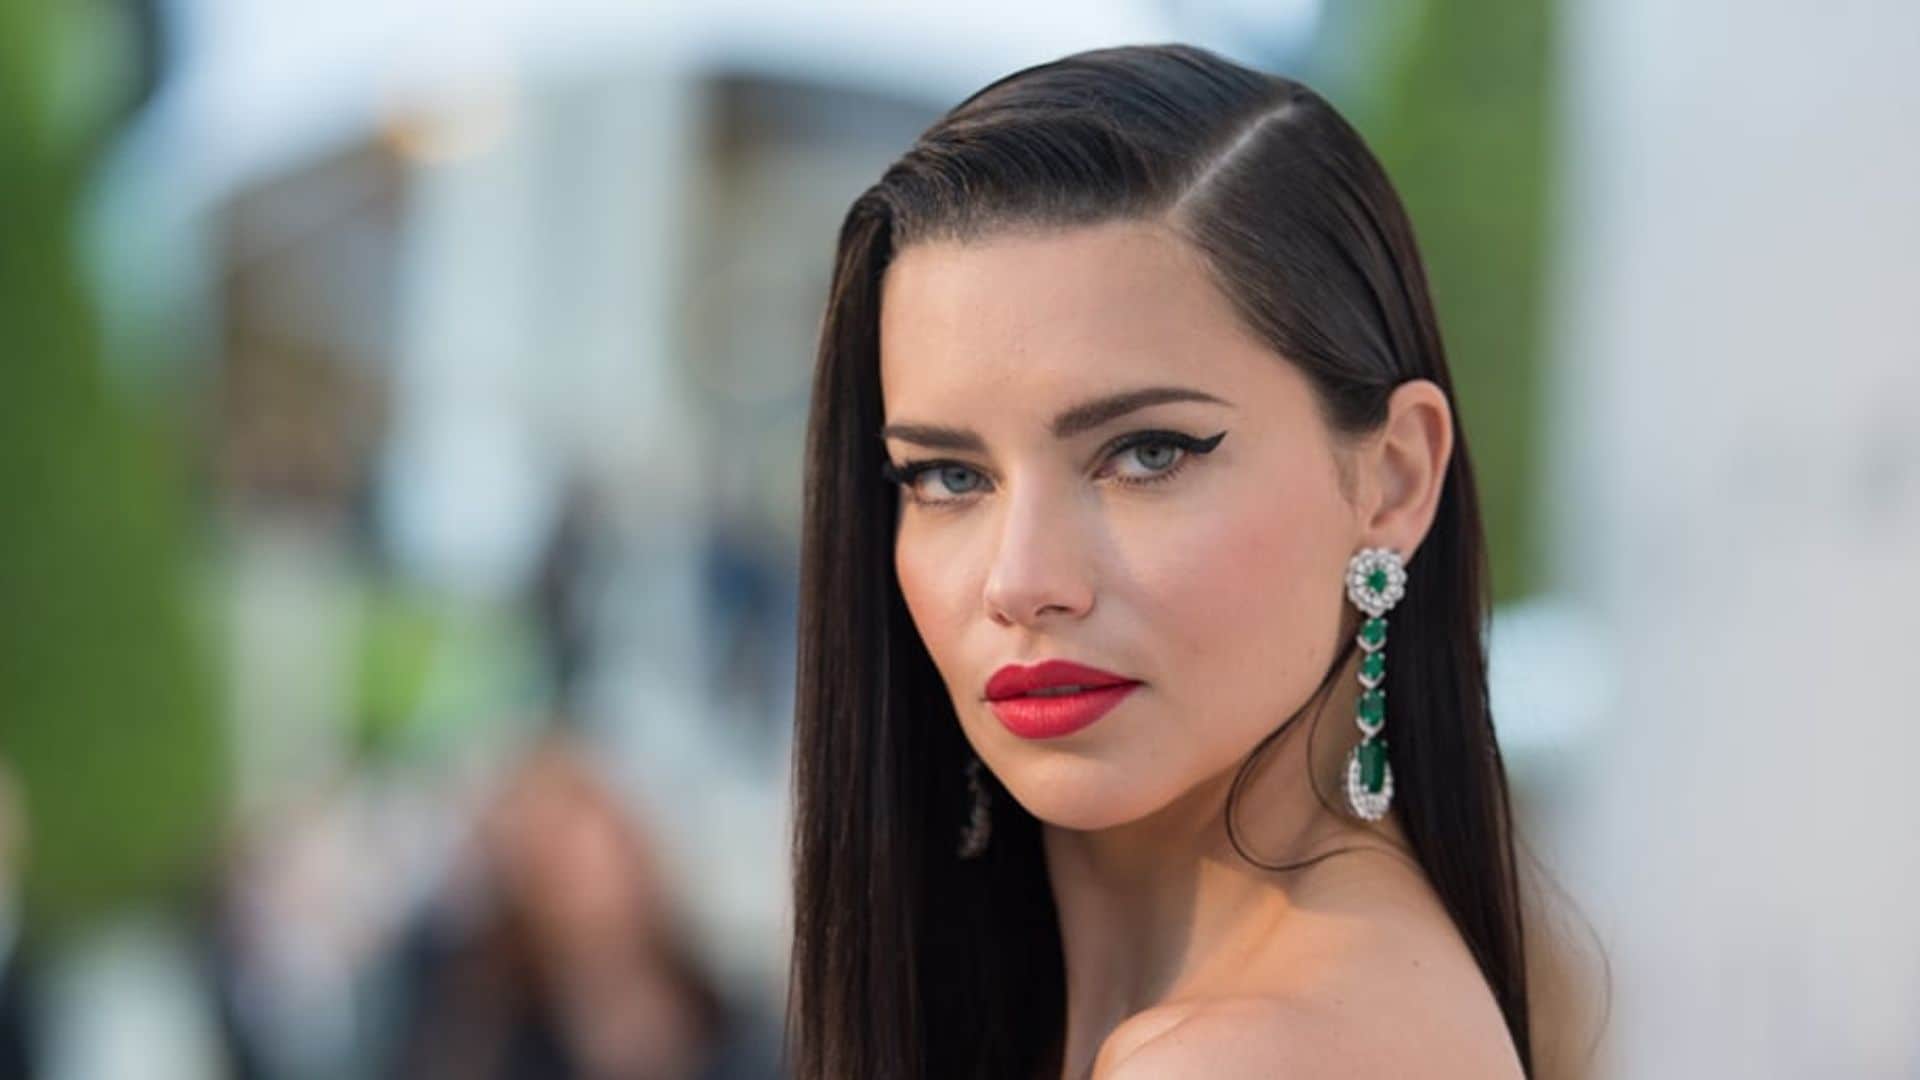 Adriana Lima and other stars shed light on Brazil's Amazon rainforest fires